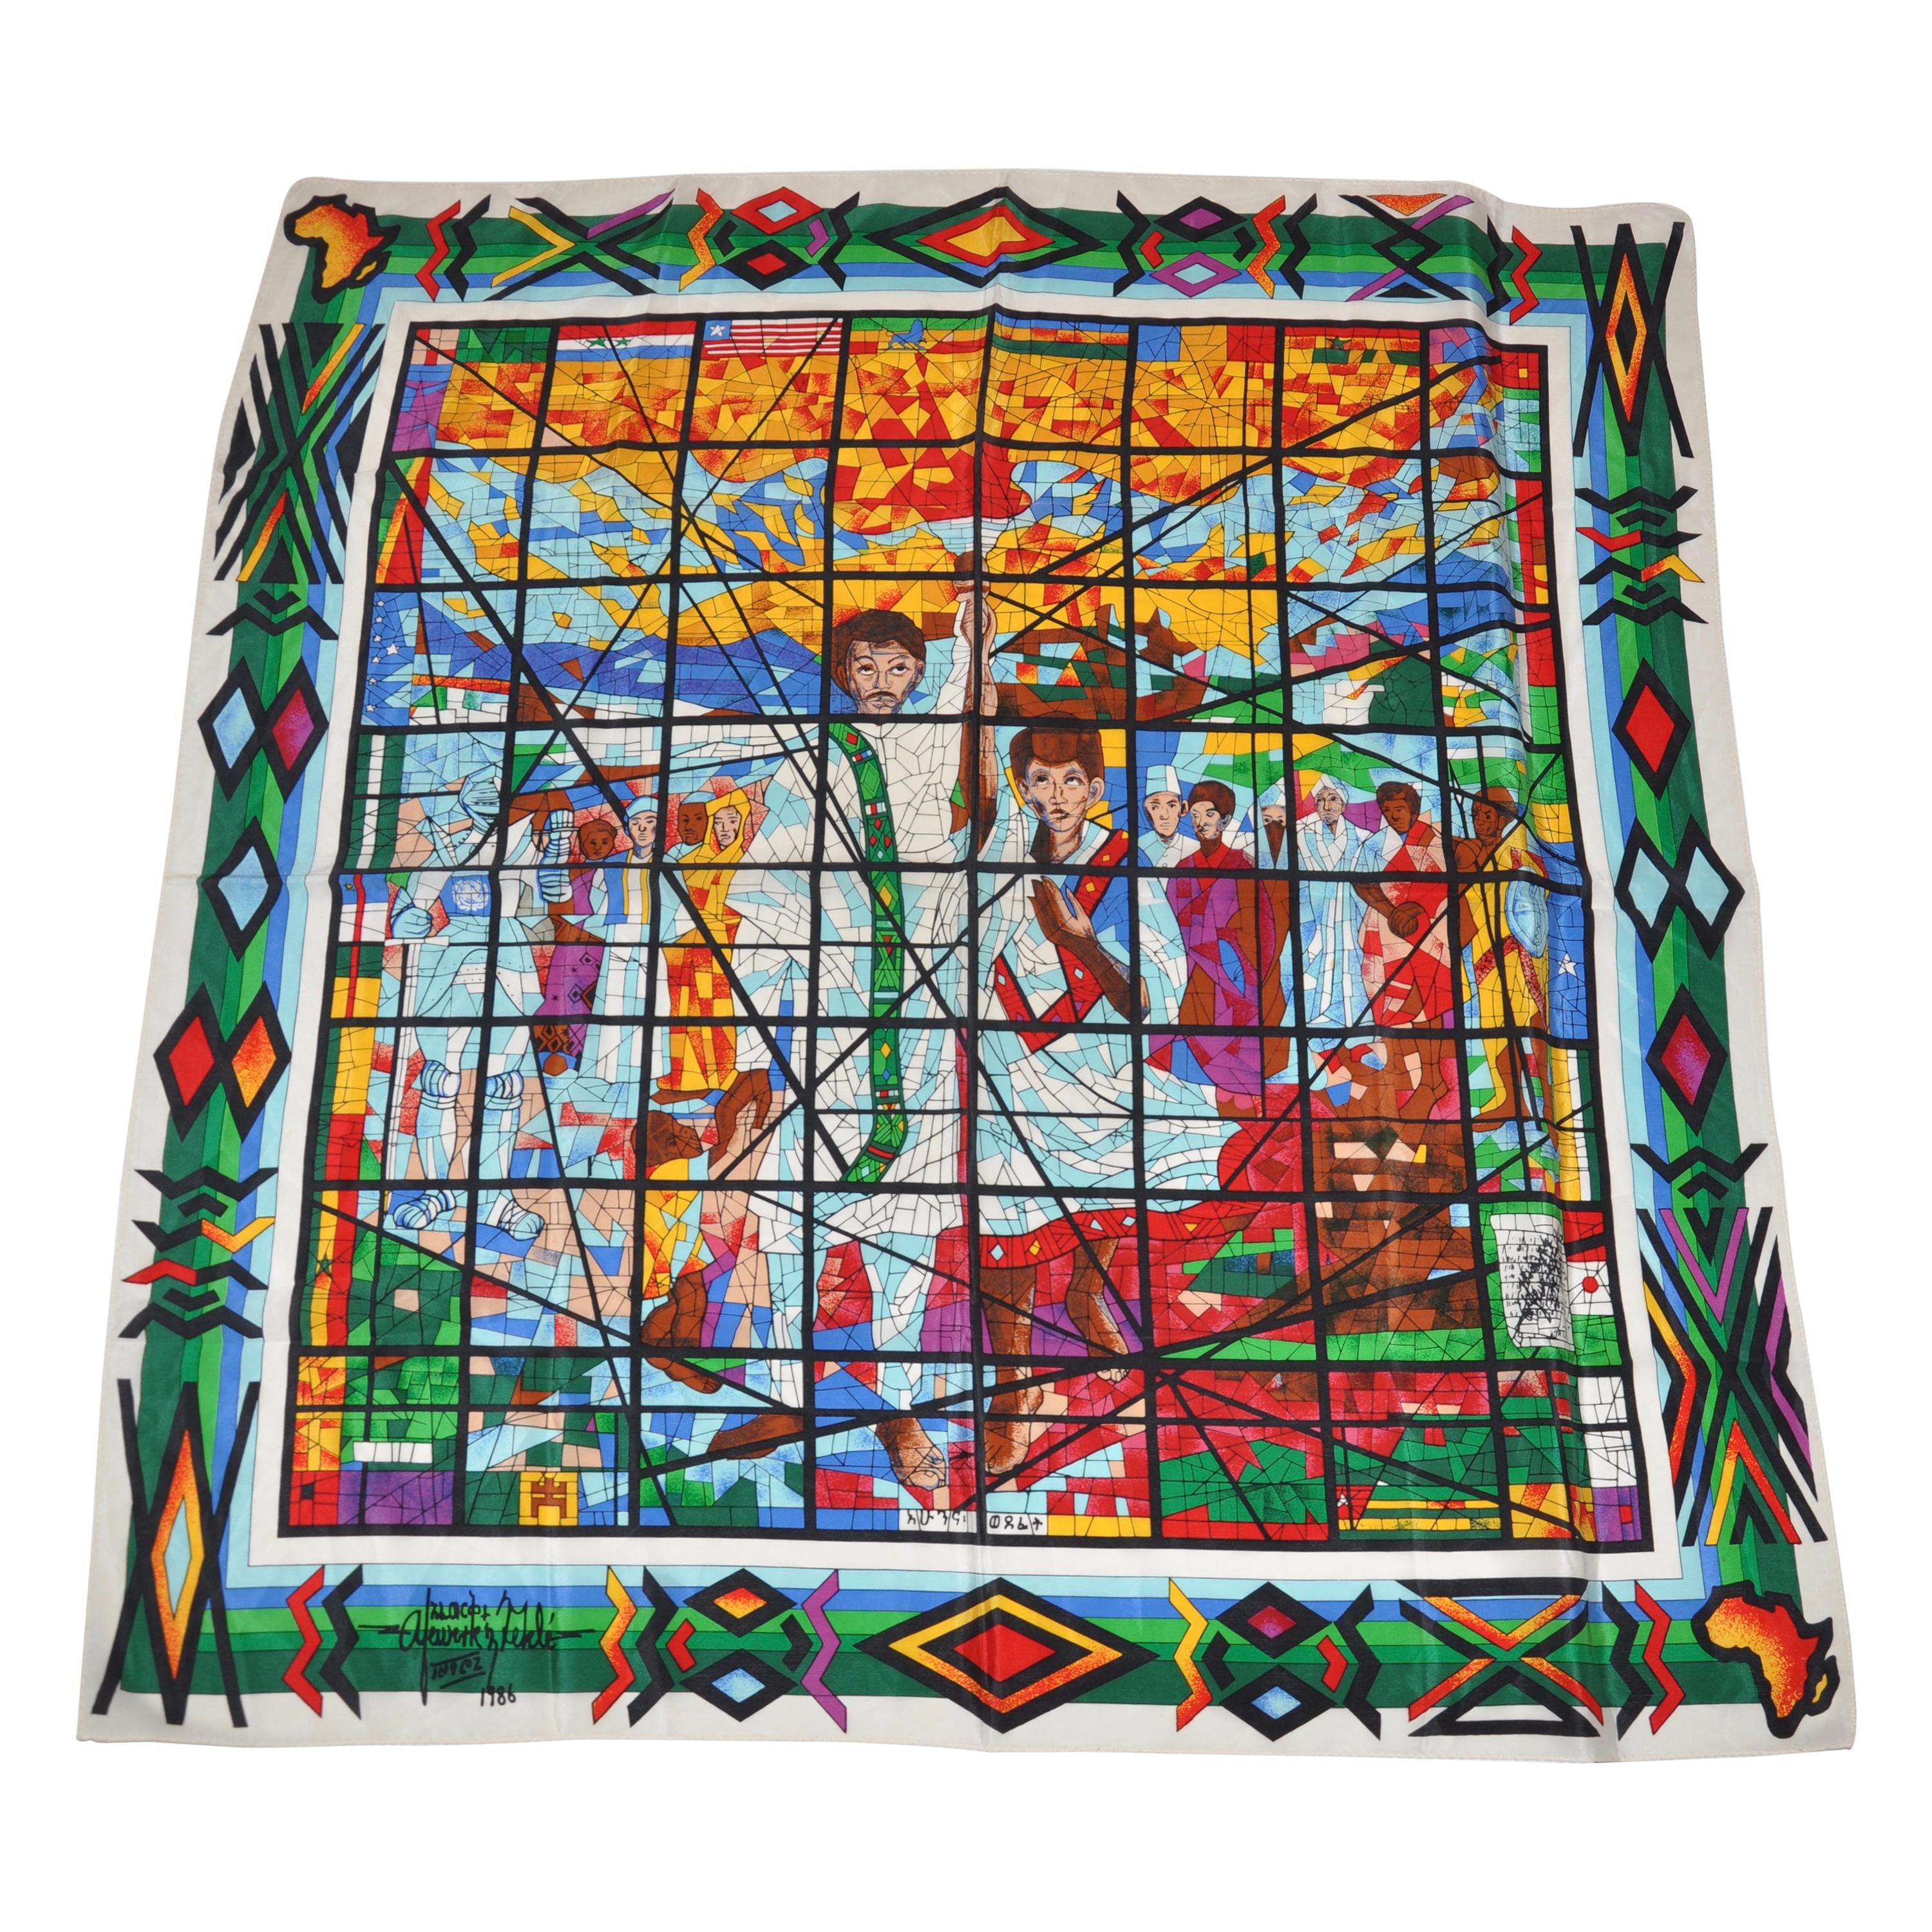 "Limited Edition" 1986 Afewerk & Tekle "Stained Glass" Silk Scarf